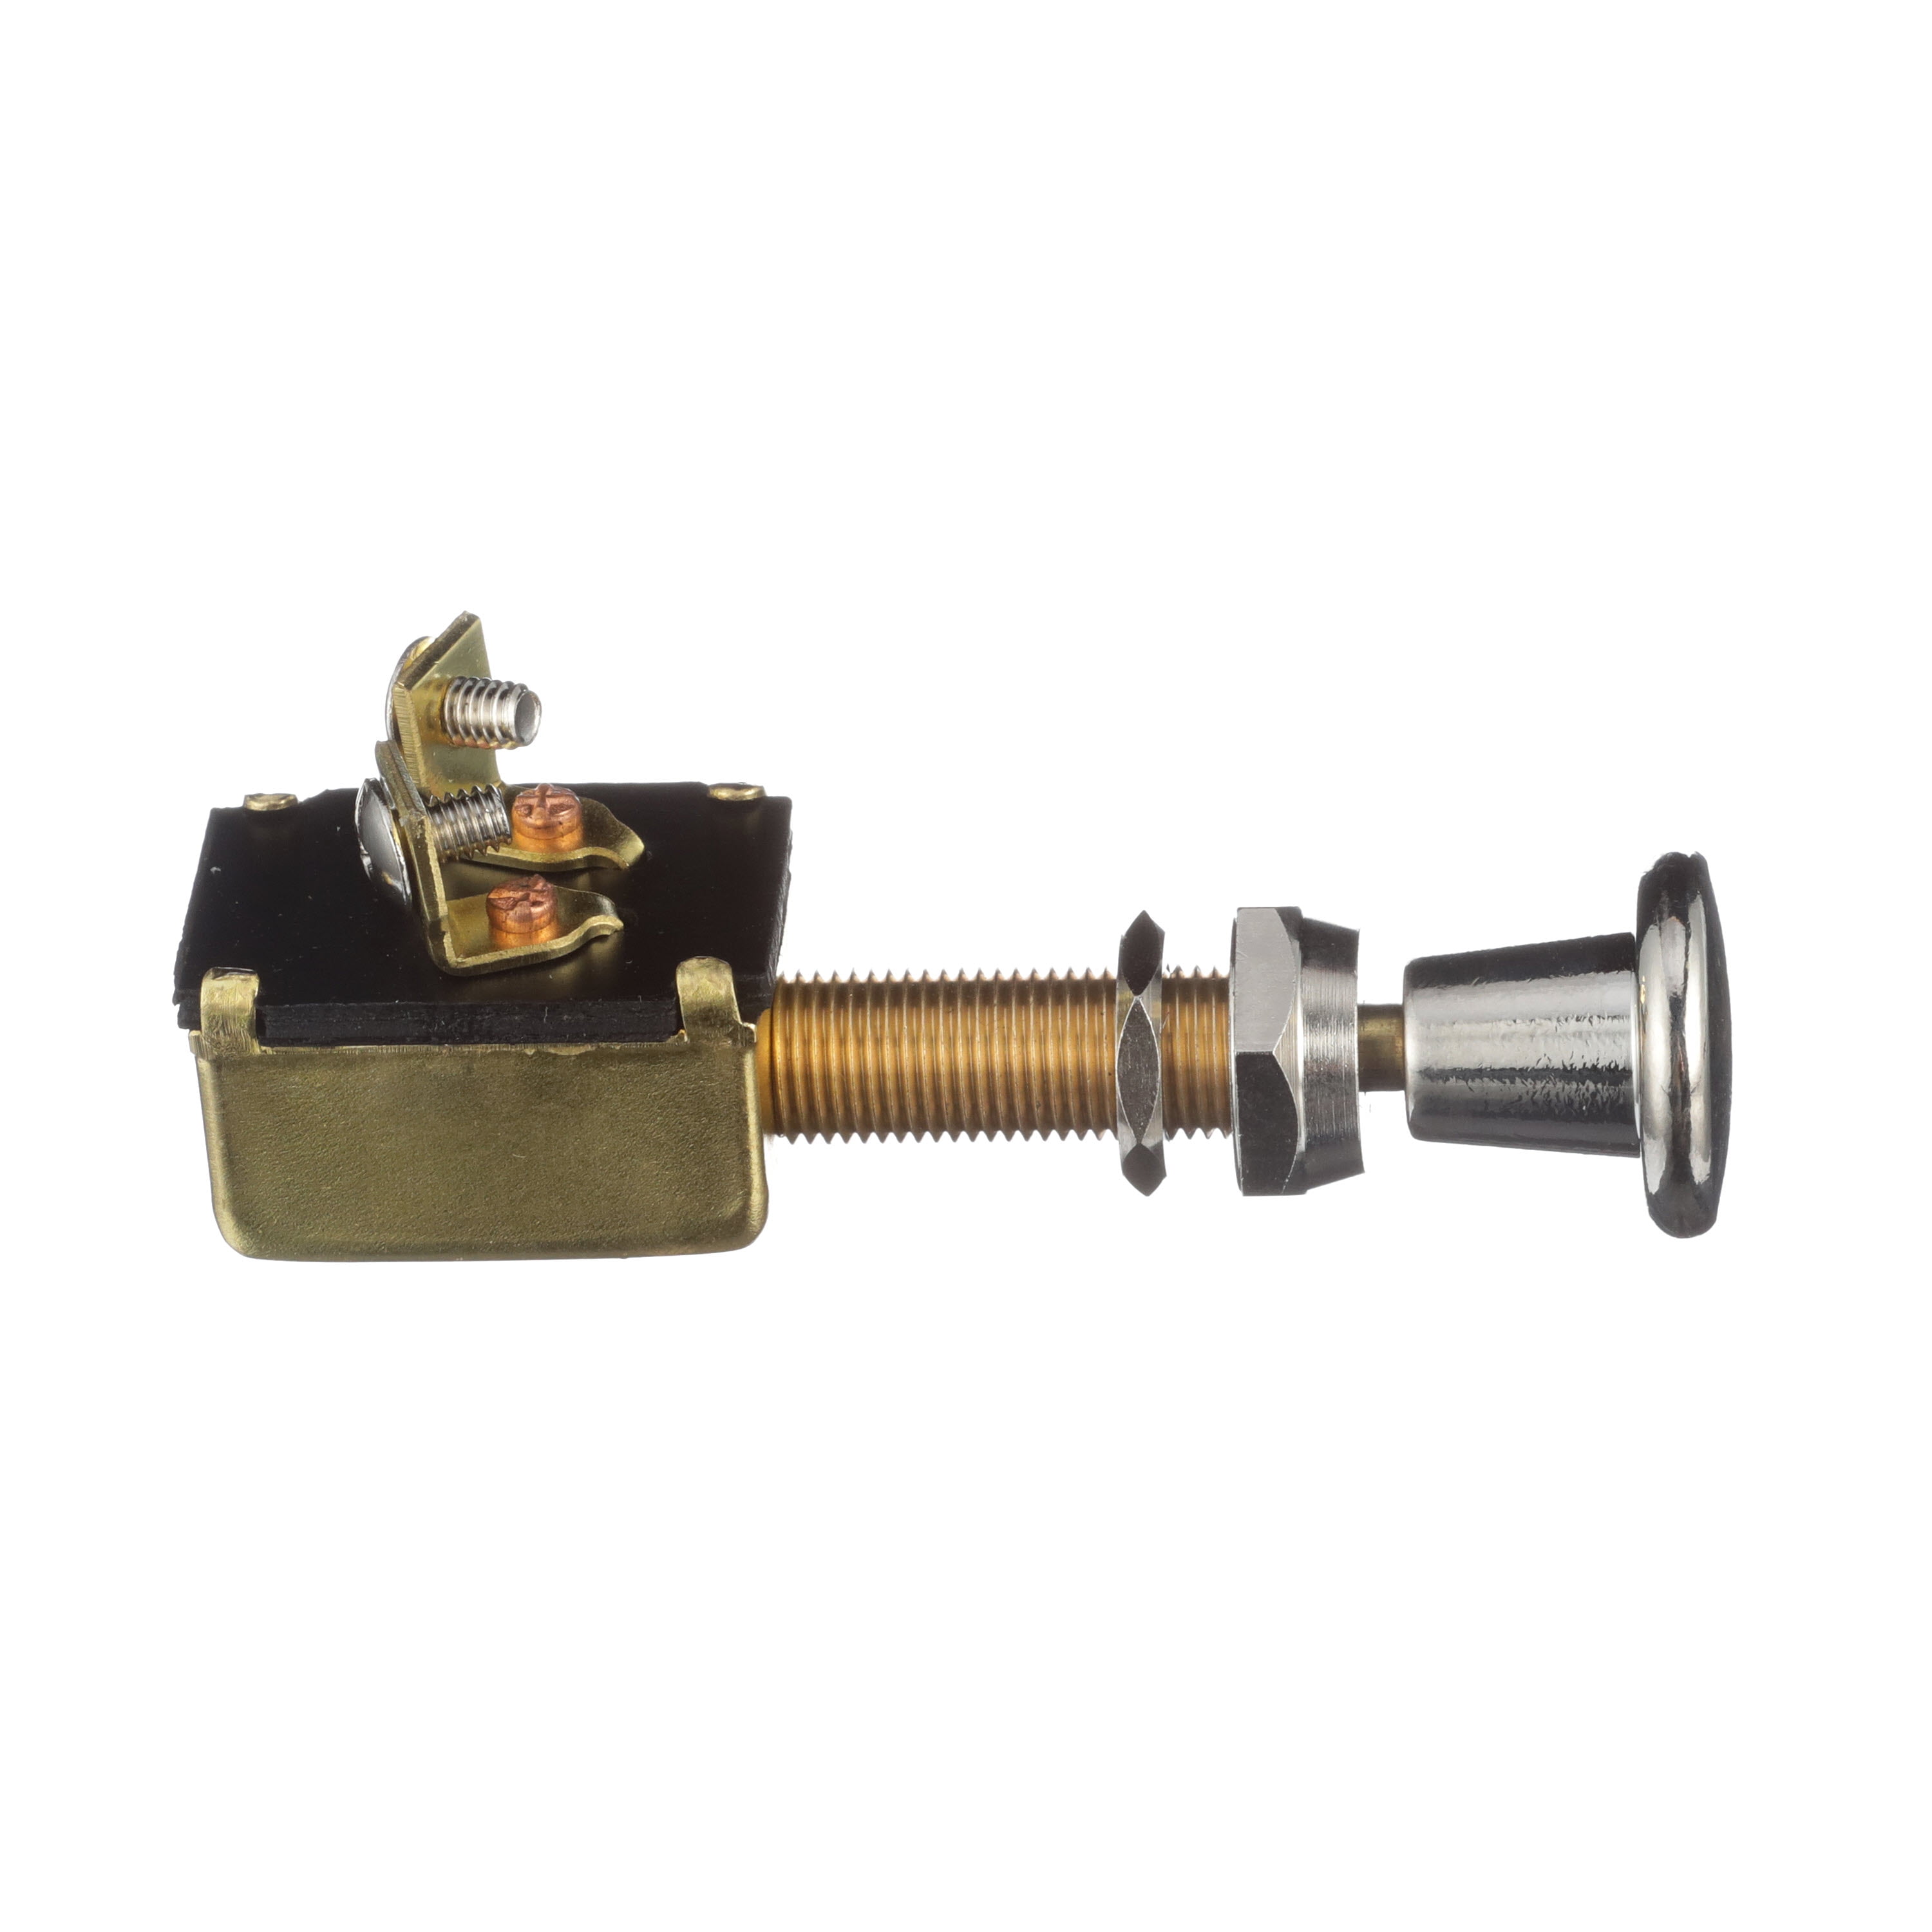 Boat Marine Push-Pull Switch Two 1/4" Blade Terminals Rated 15 Amps at 12V DC 